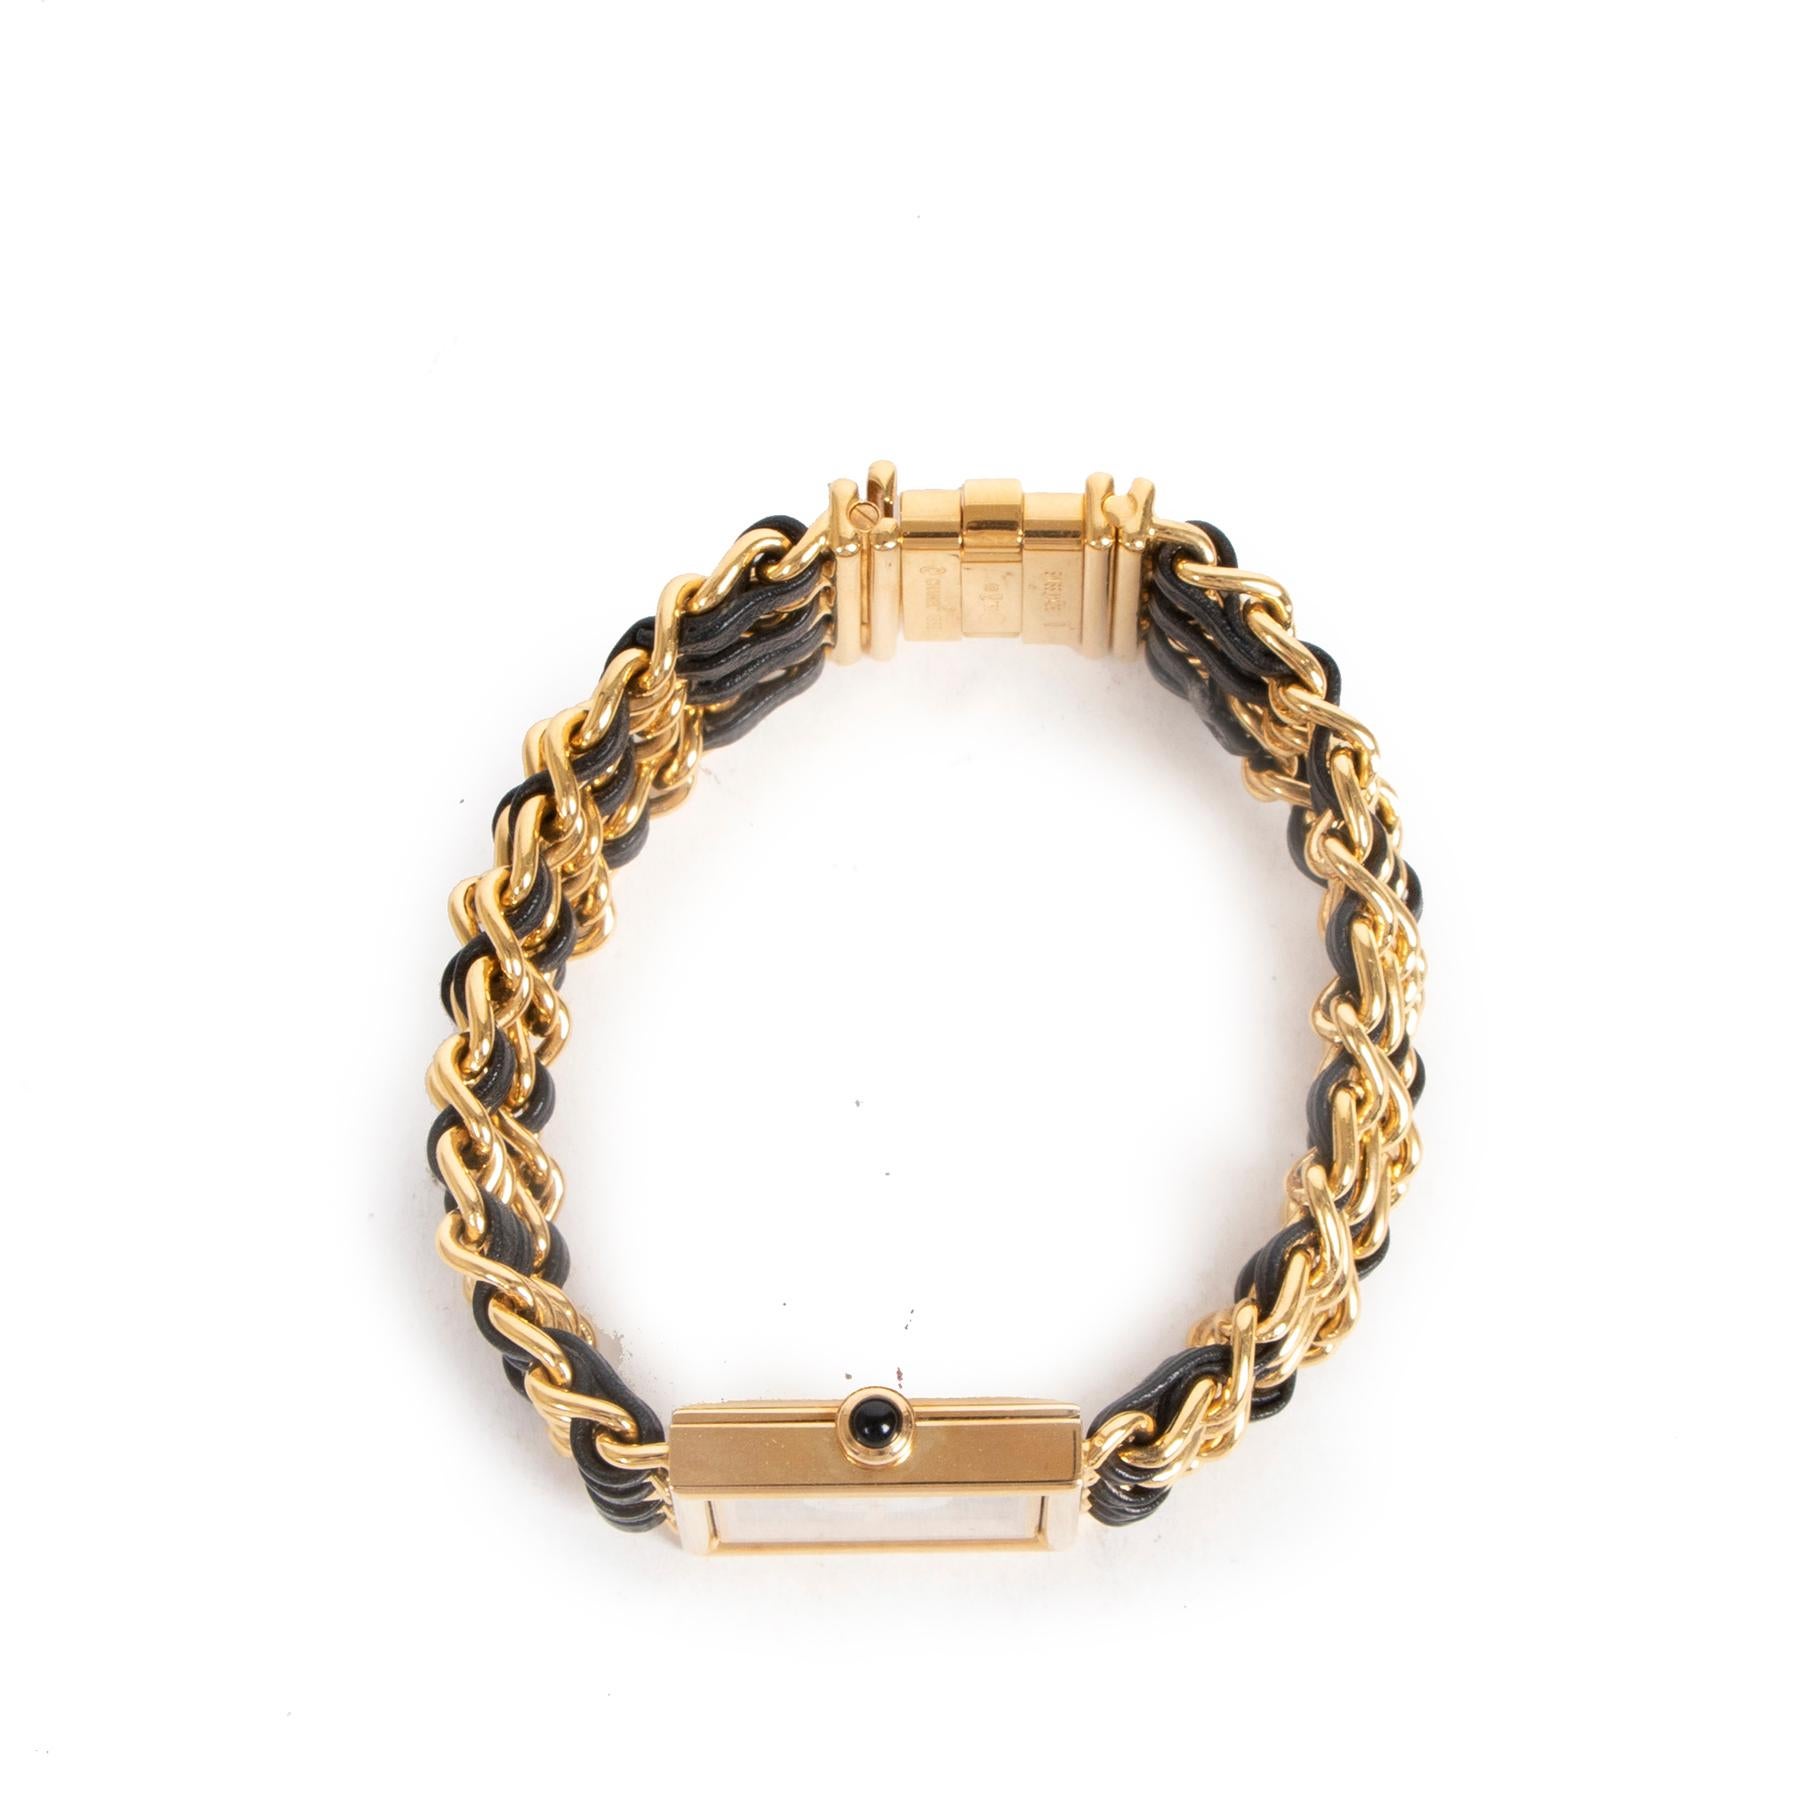 Contemporary Chanel Woven Chain Mademoiselle 18K Watch